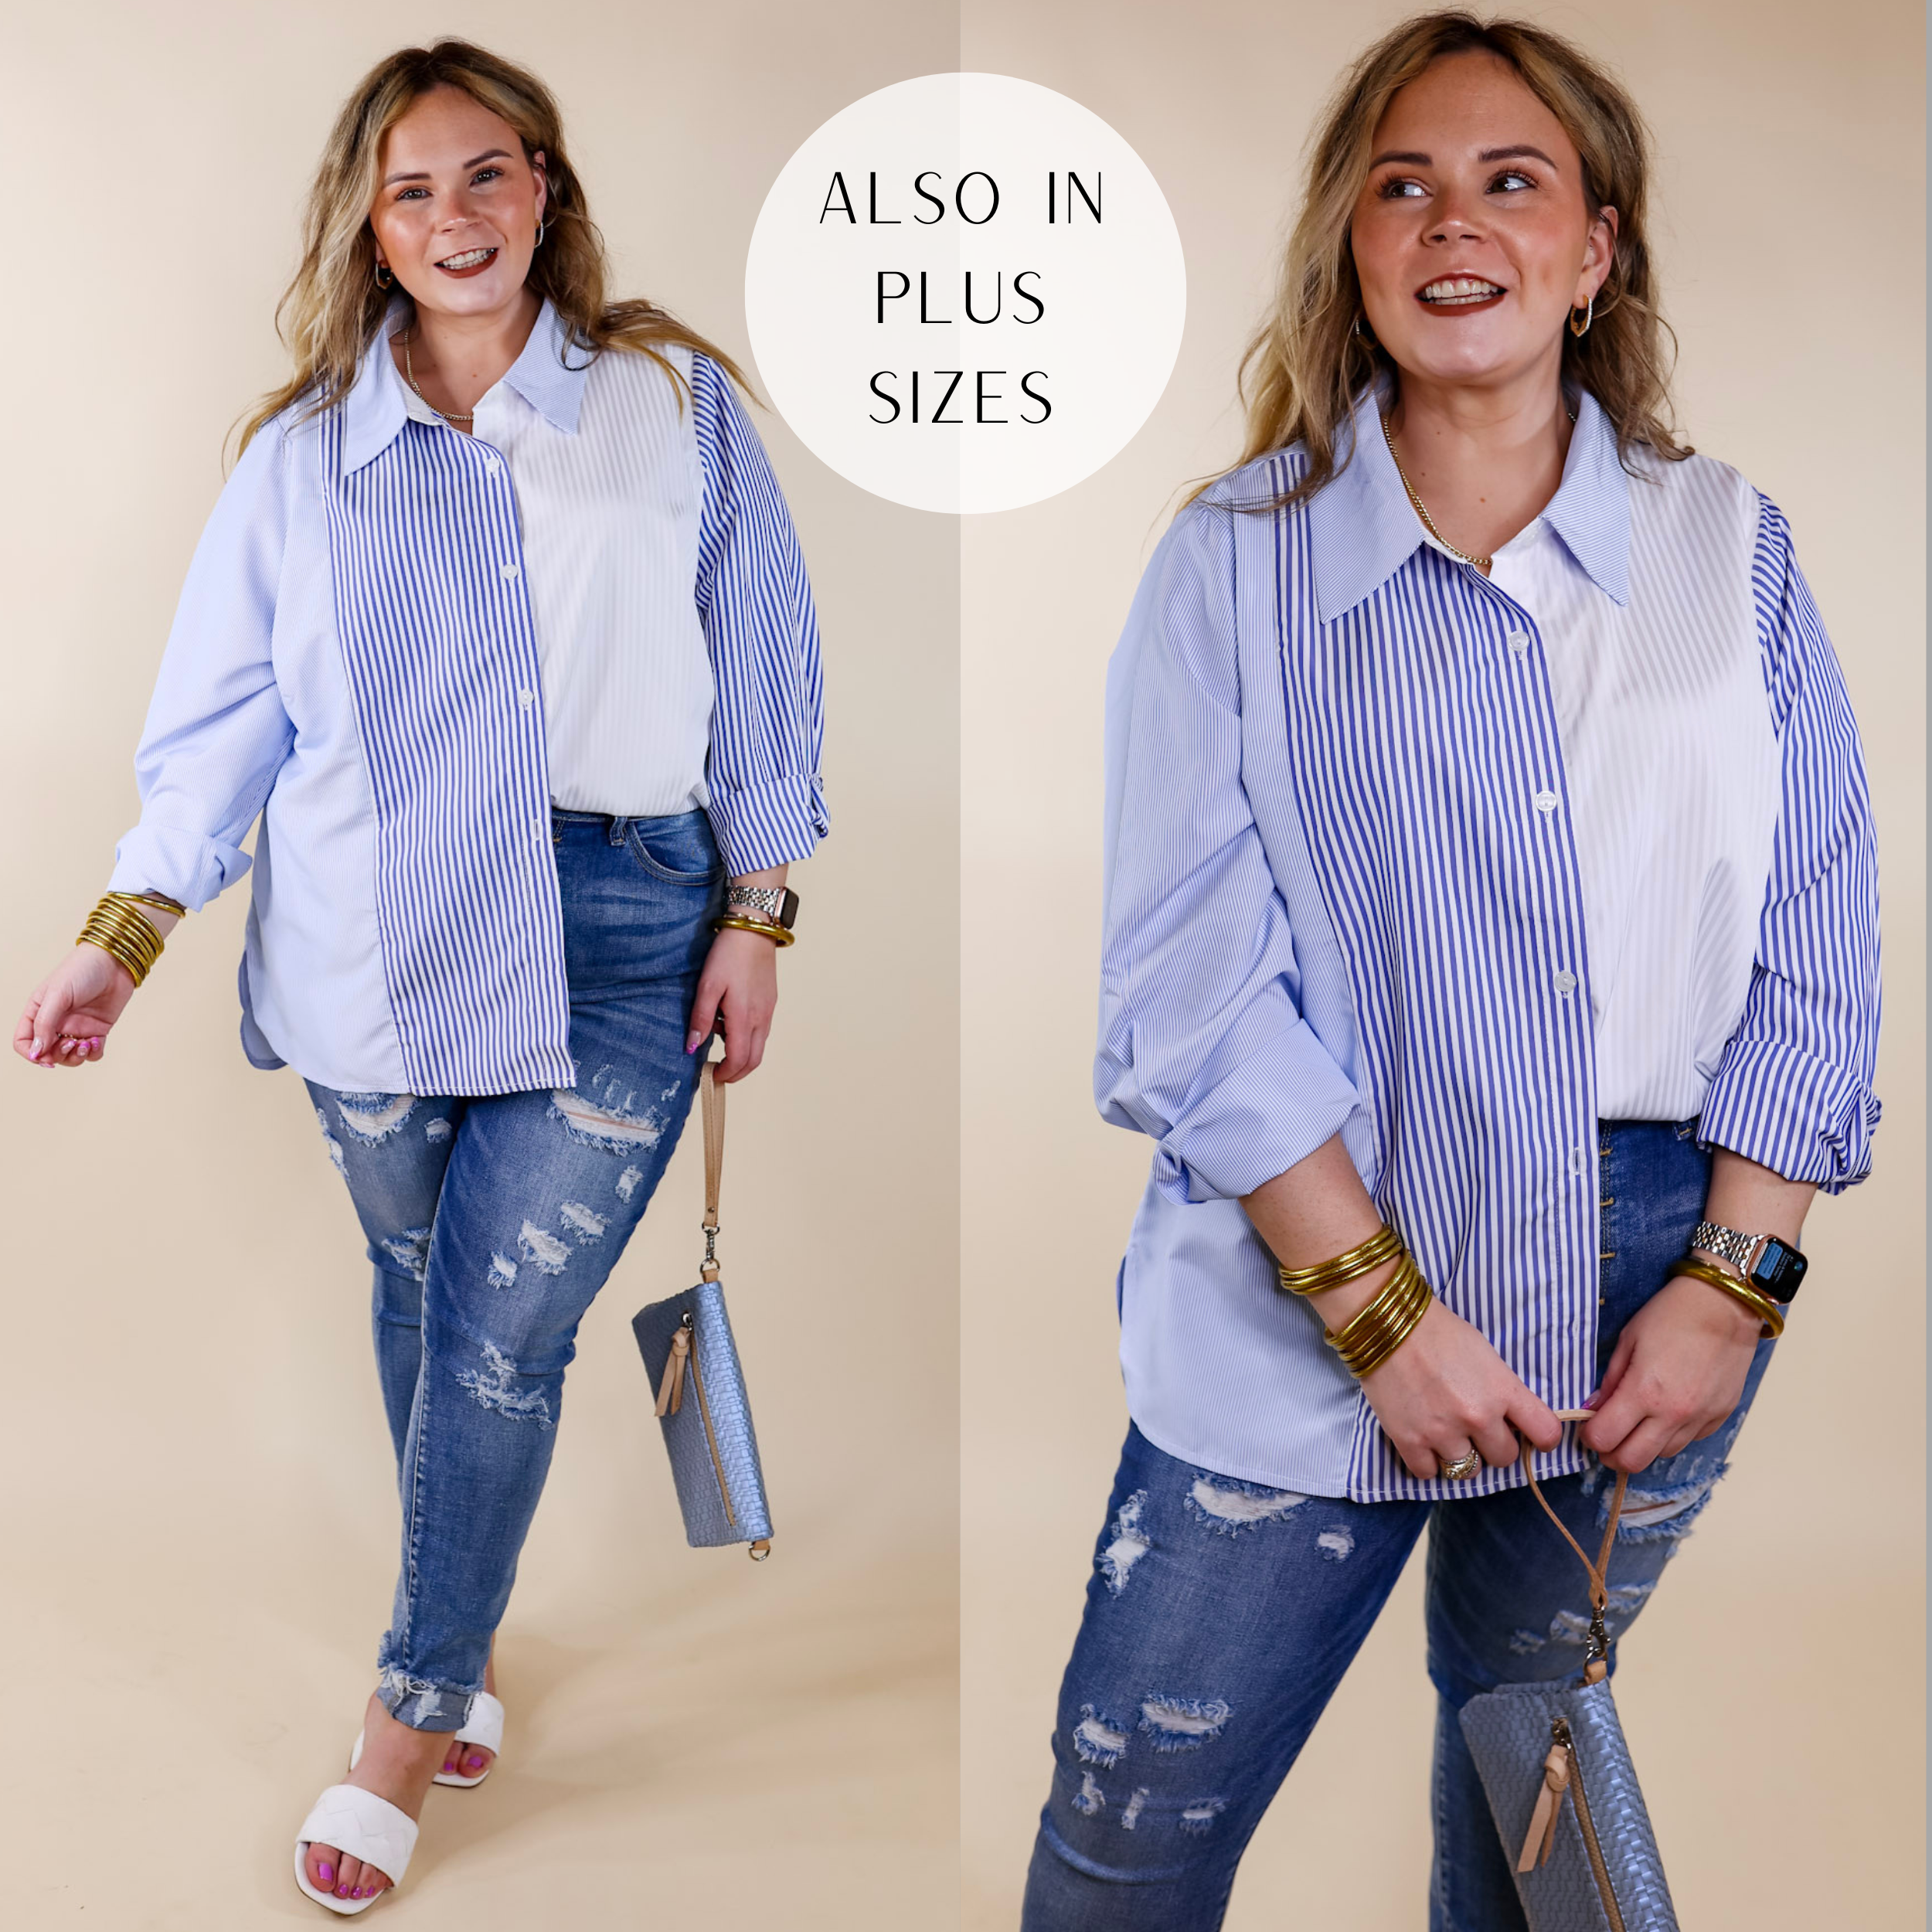 Back To You Pin Stripe Color Block Button Up Top in Blue and White - Giddy Up Glamour Boutique